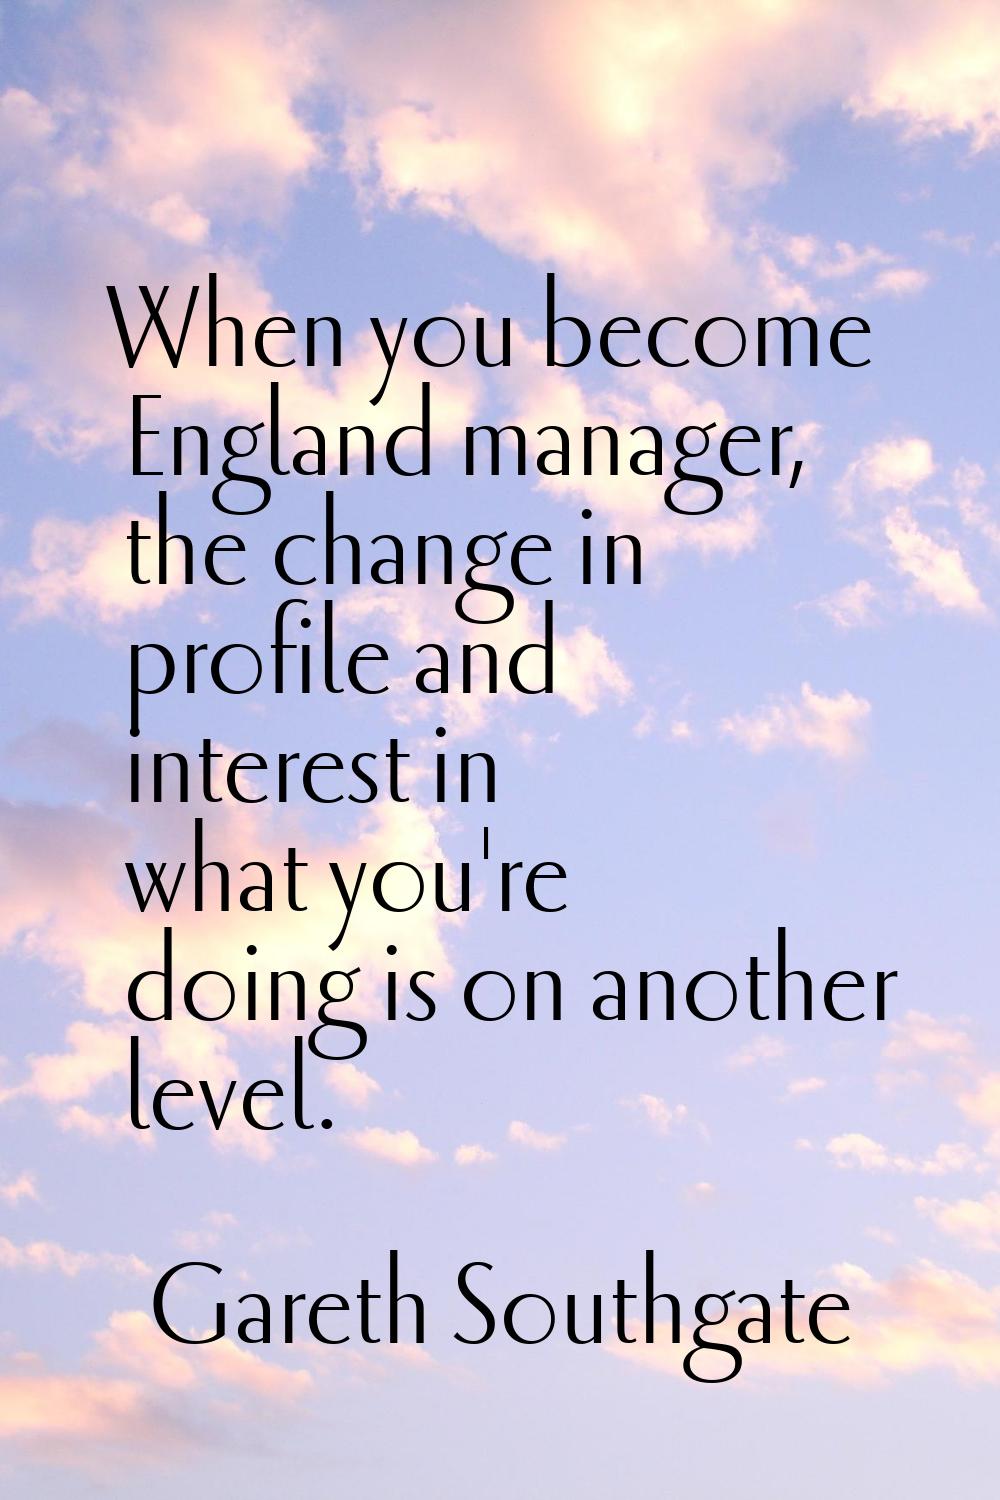 When you become England manager, the change in profile and interest in what you're doing is on anot